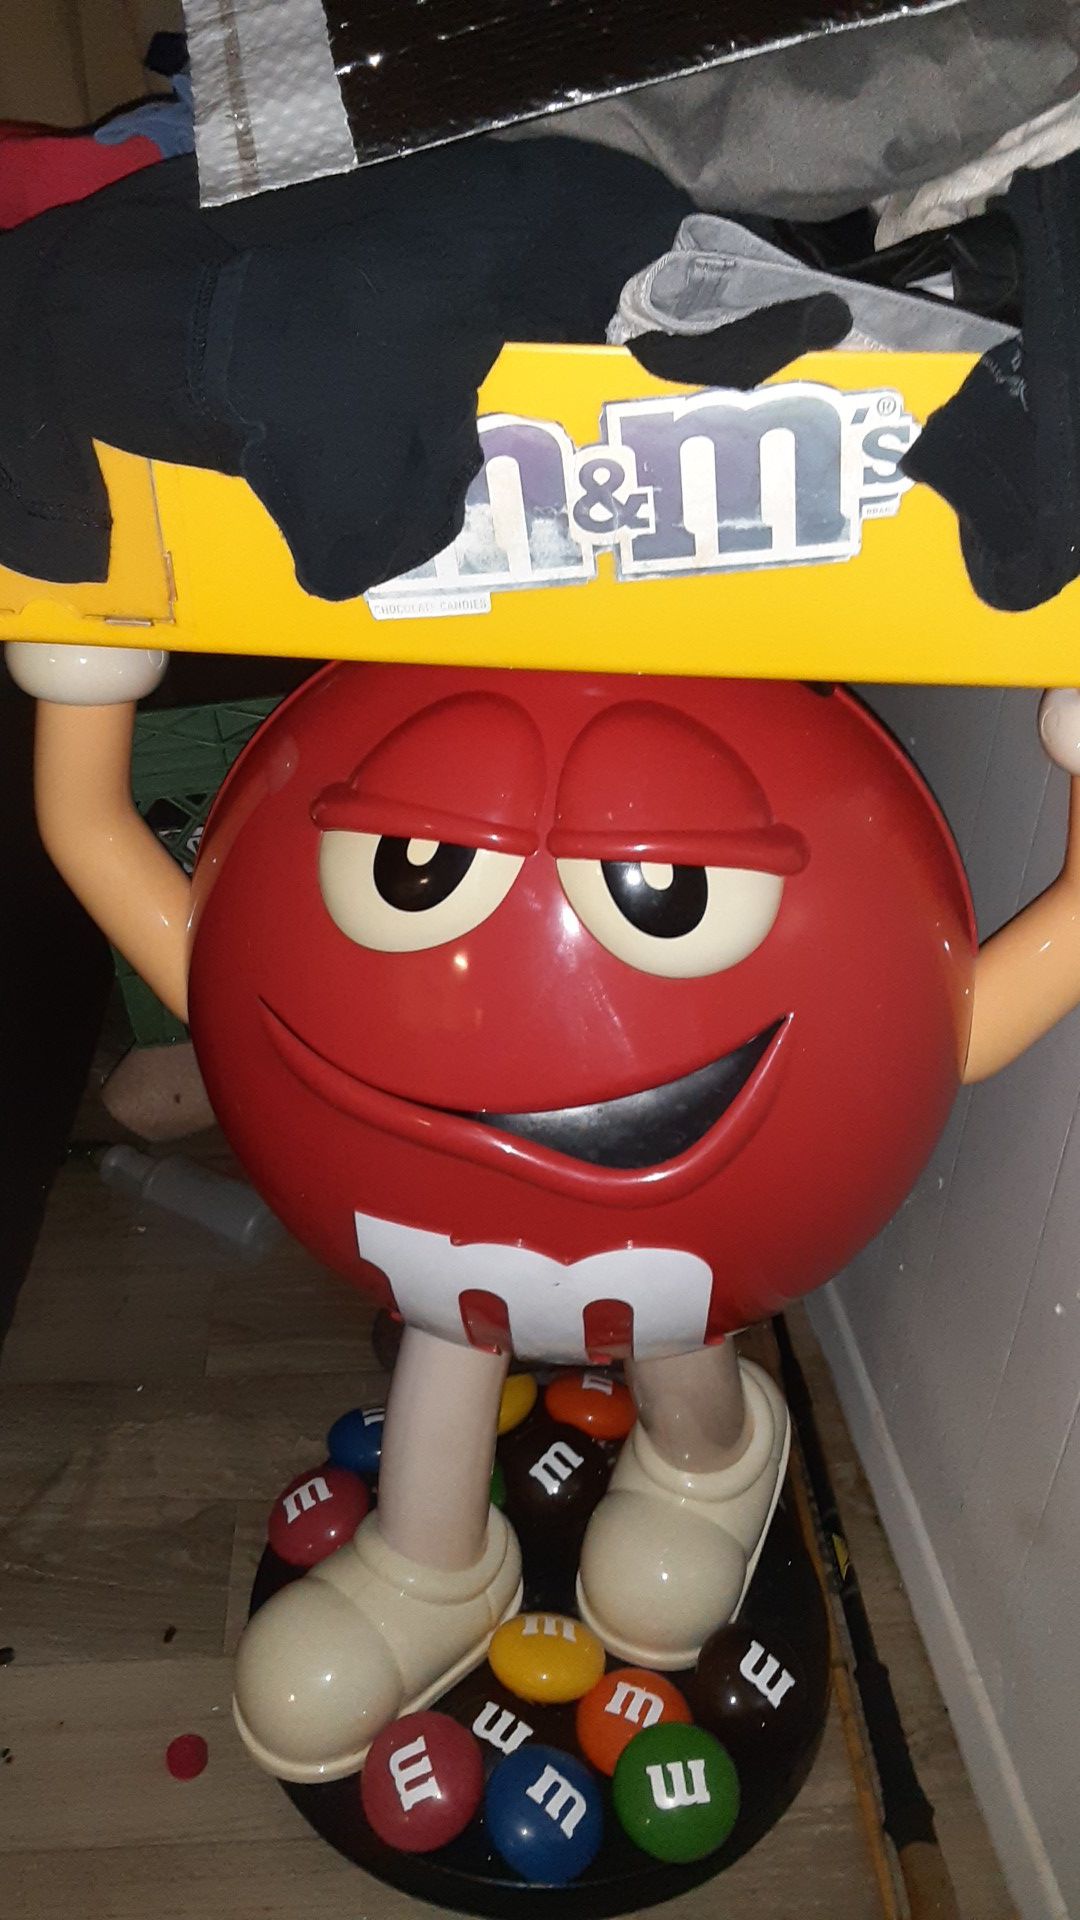 M and m statue highly collectable. 3.5 feet tall